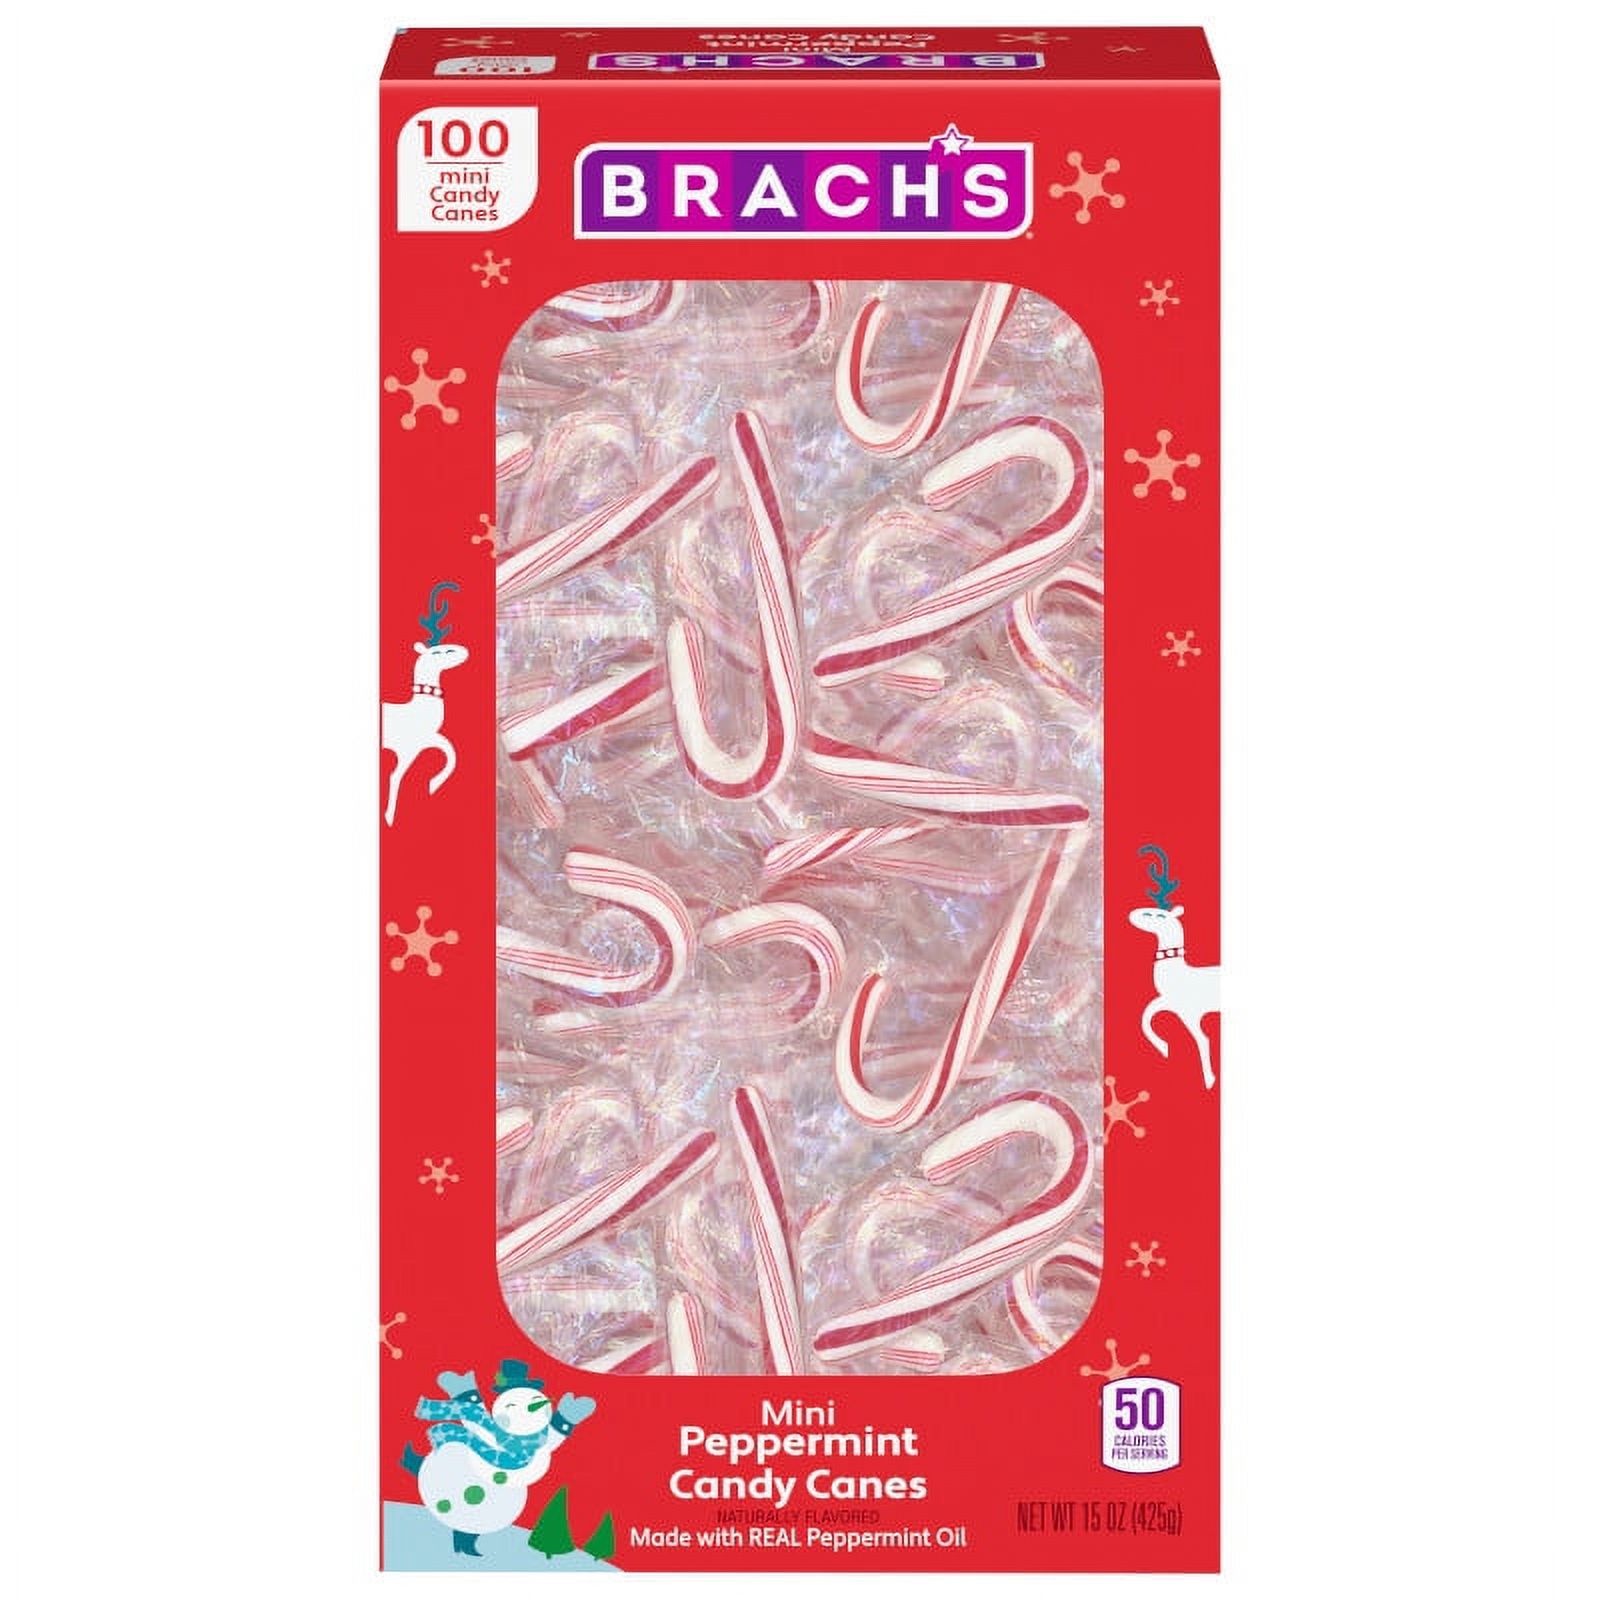 Brach's Mini Peppermint Holiday Candy Canes, Christmas Stocking Stuffer Candy, 100ct Box, 15oz - image 1 of 12